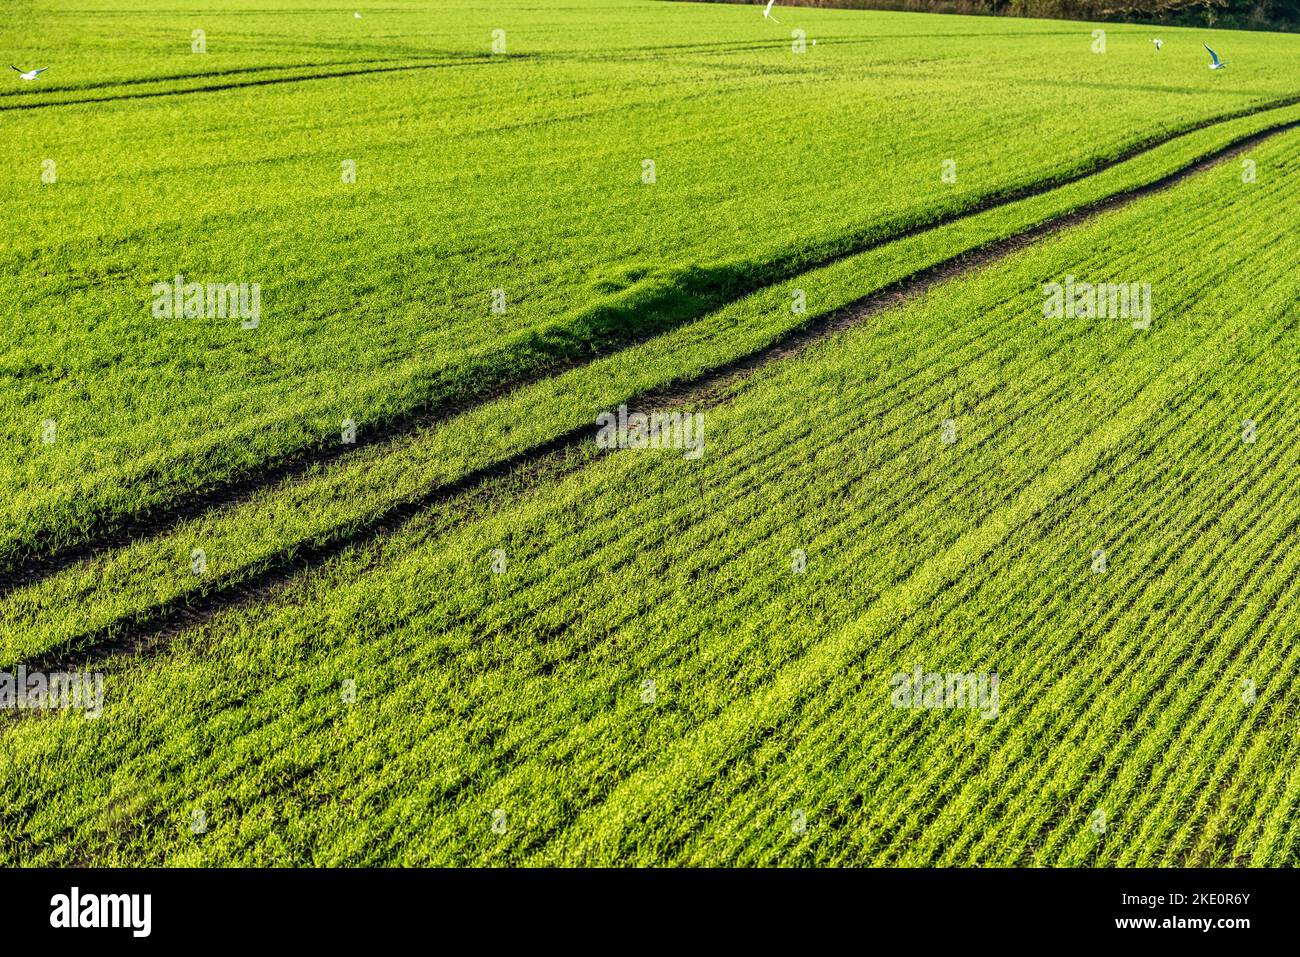 New planted wheatfield growing winter wheat with tractor wheel tracks through the green... Stock Photo